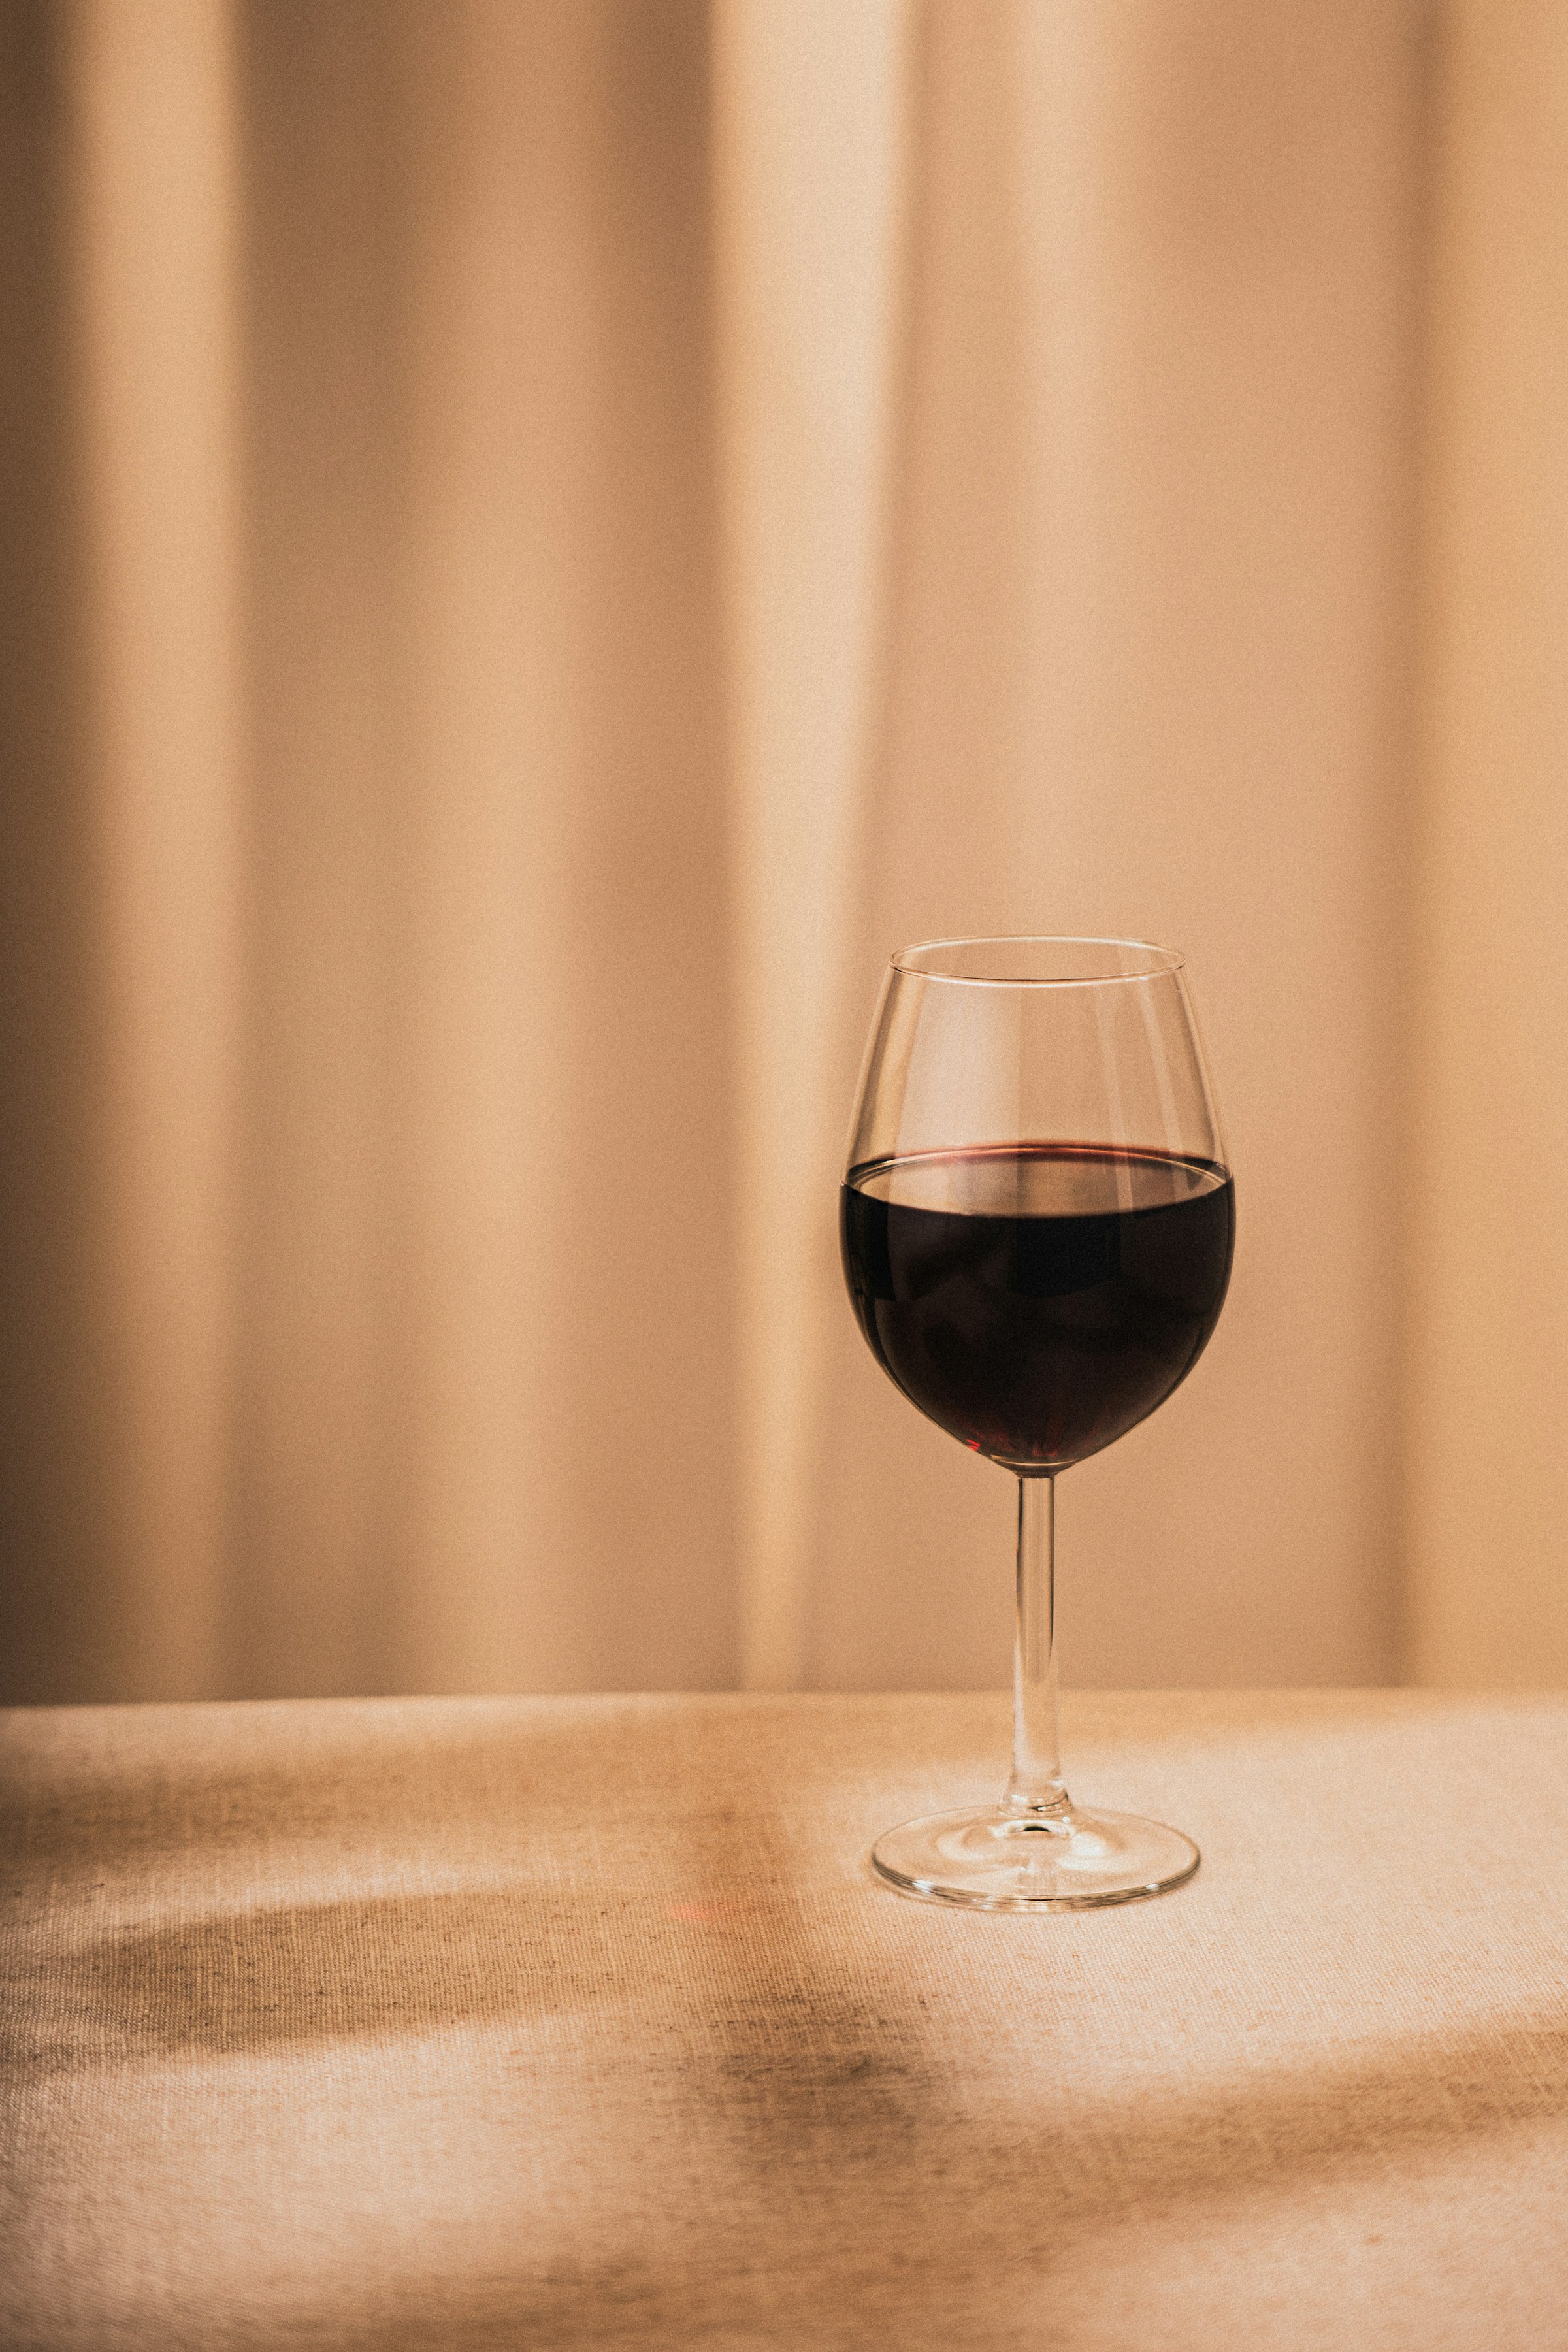 A glass of wine on a table | Source: Unsplash